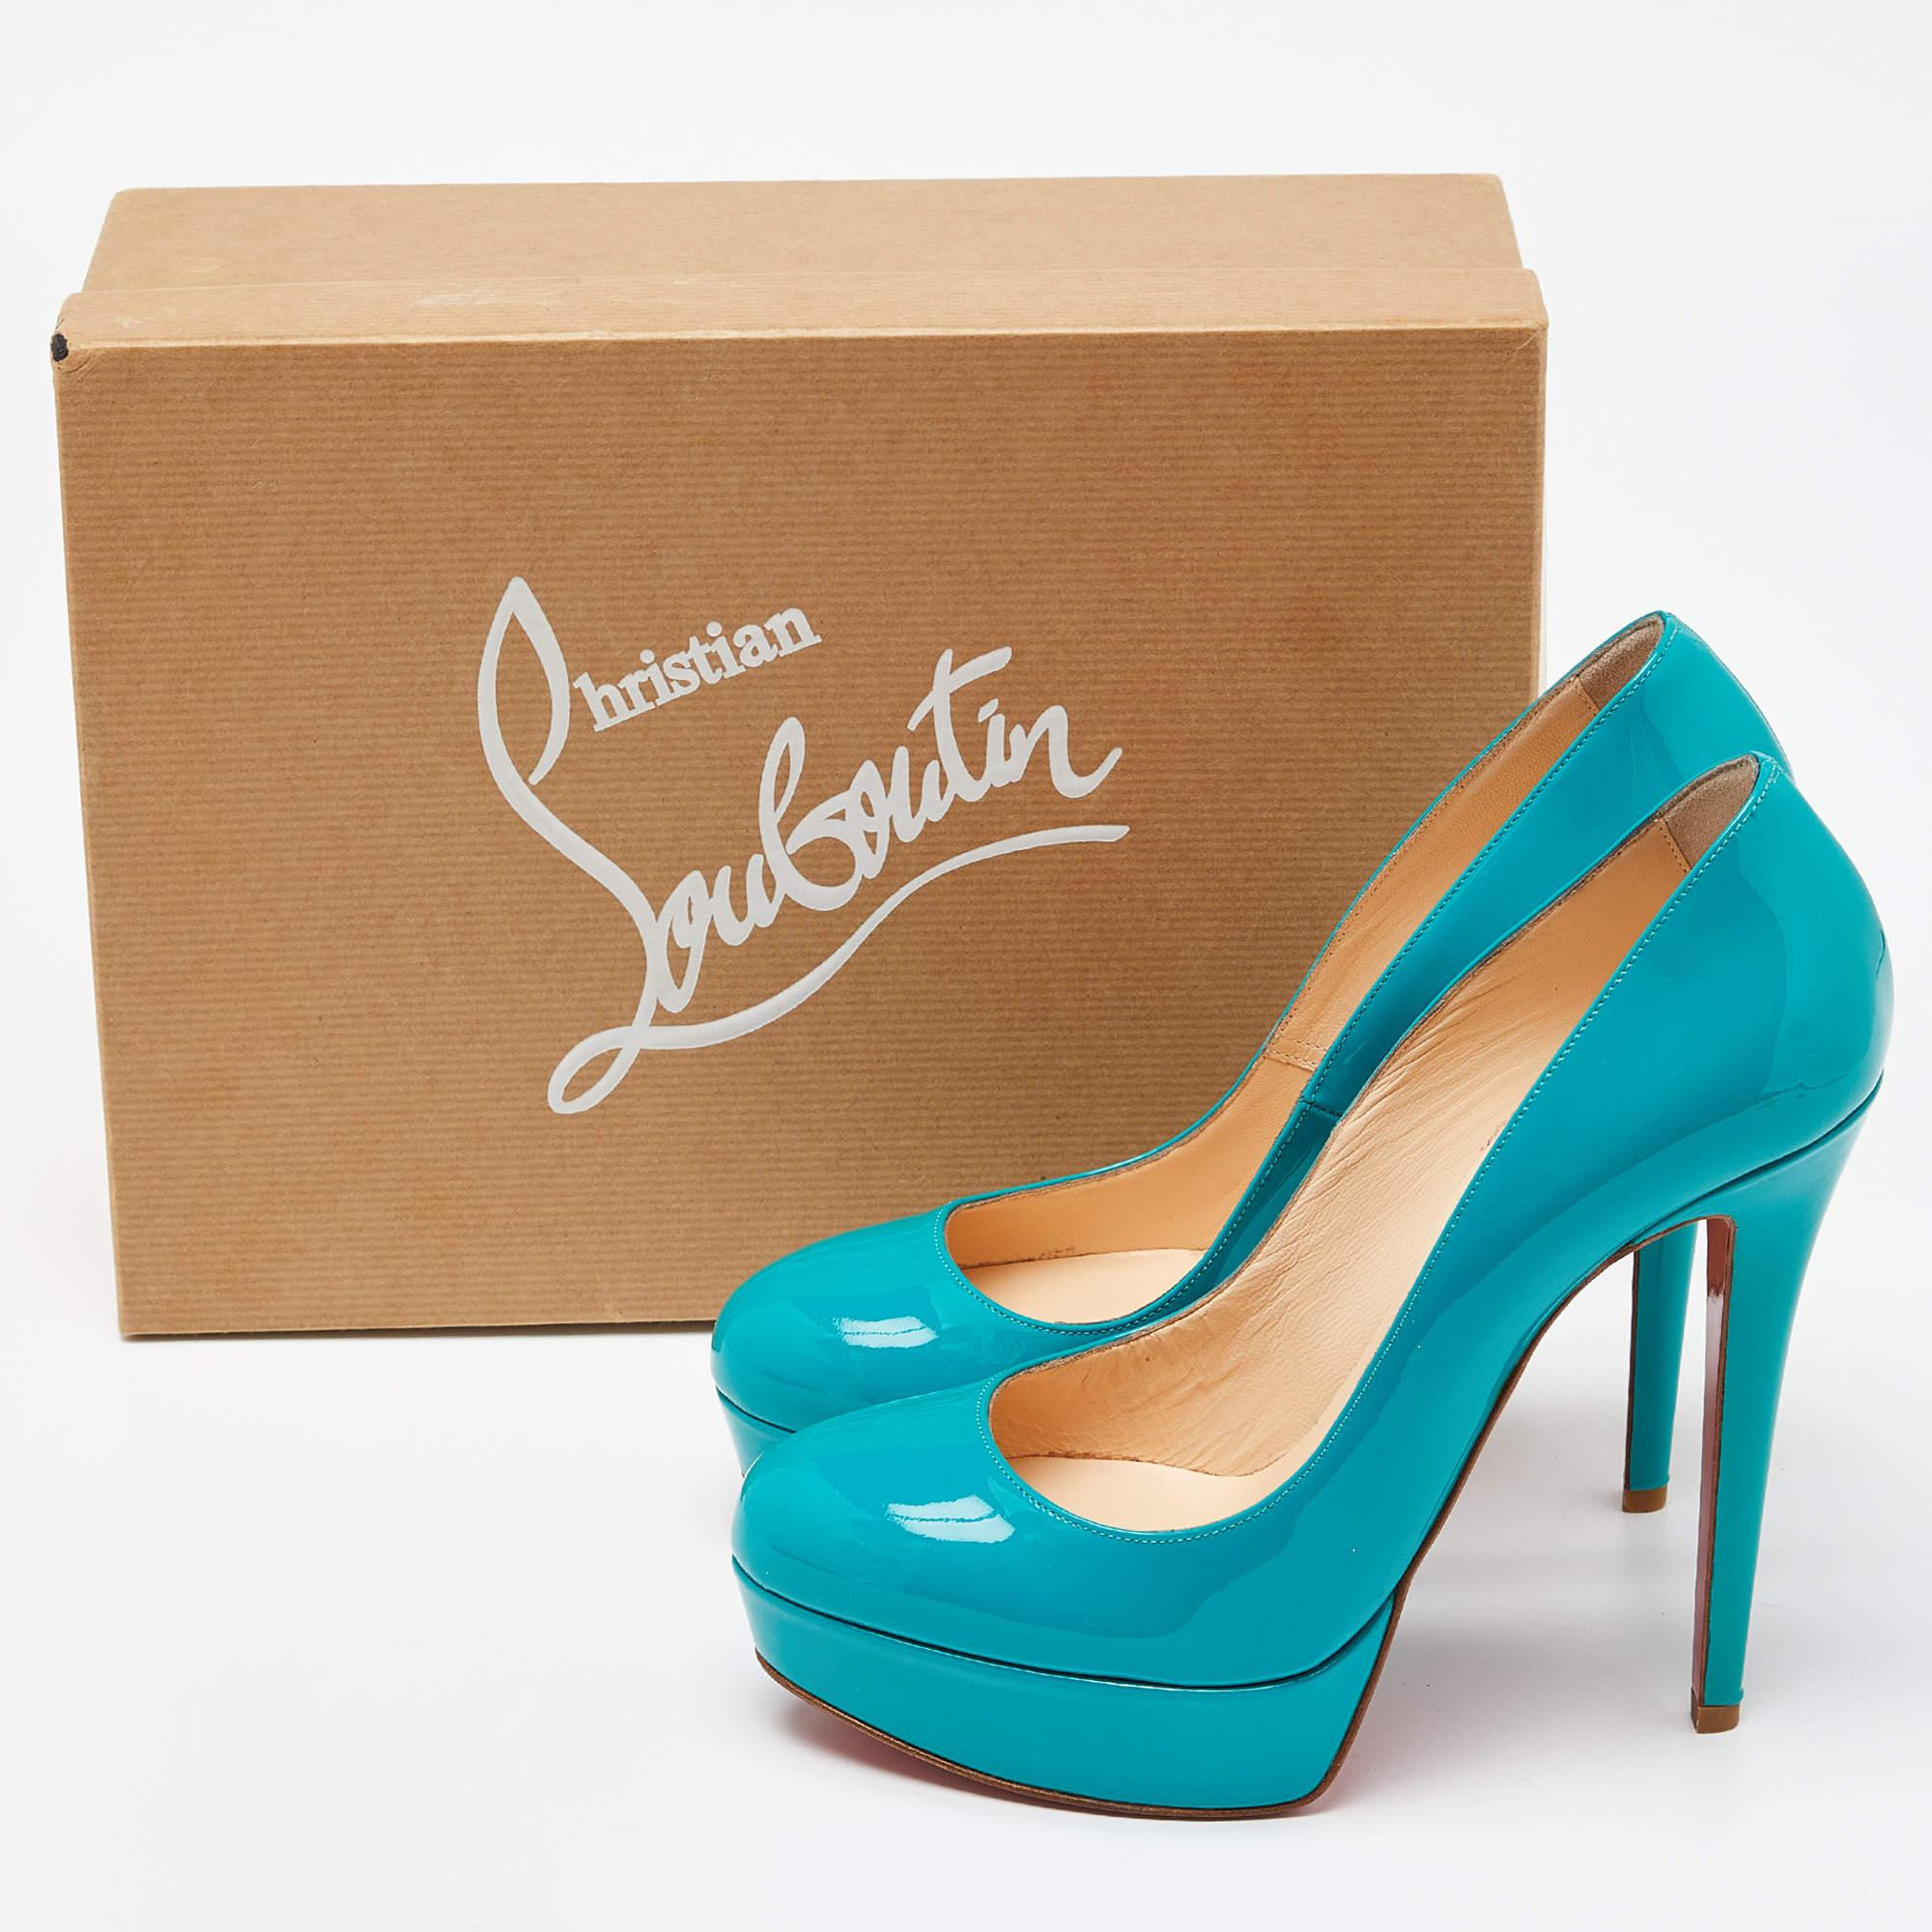 Christian Louboutin Green Patent Leather Bianca Platform Pumps Size 38 For Sale 4